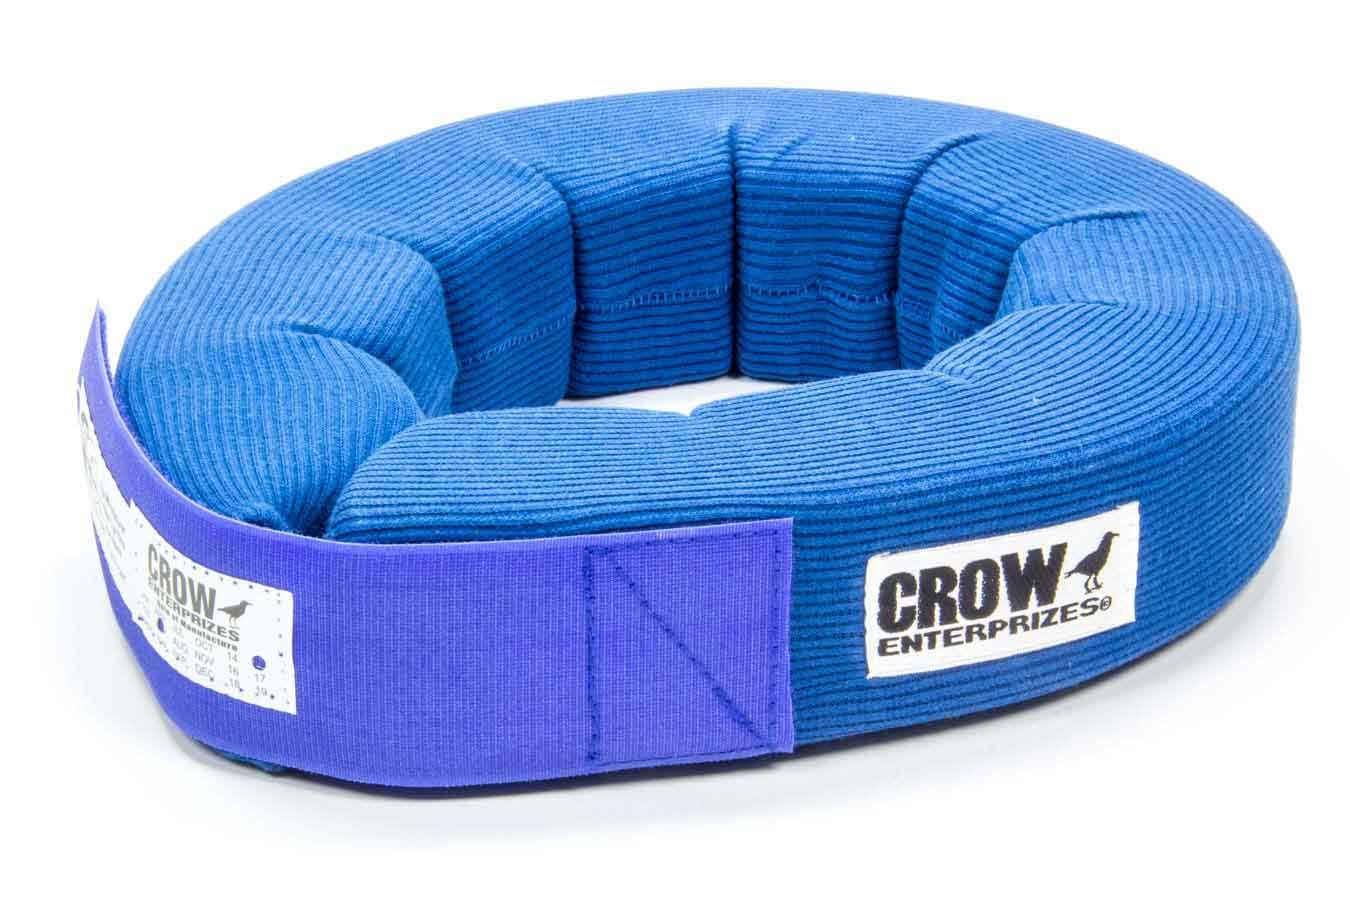 Crow Safety 20163 - Neck Support, 360 Degree, SFI 3.3, Padded, Fire Retardant Cotton Cover, Blue, Each